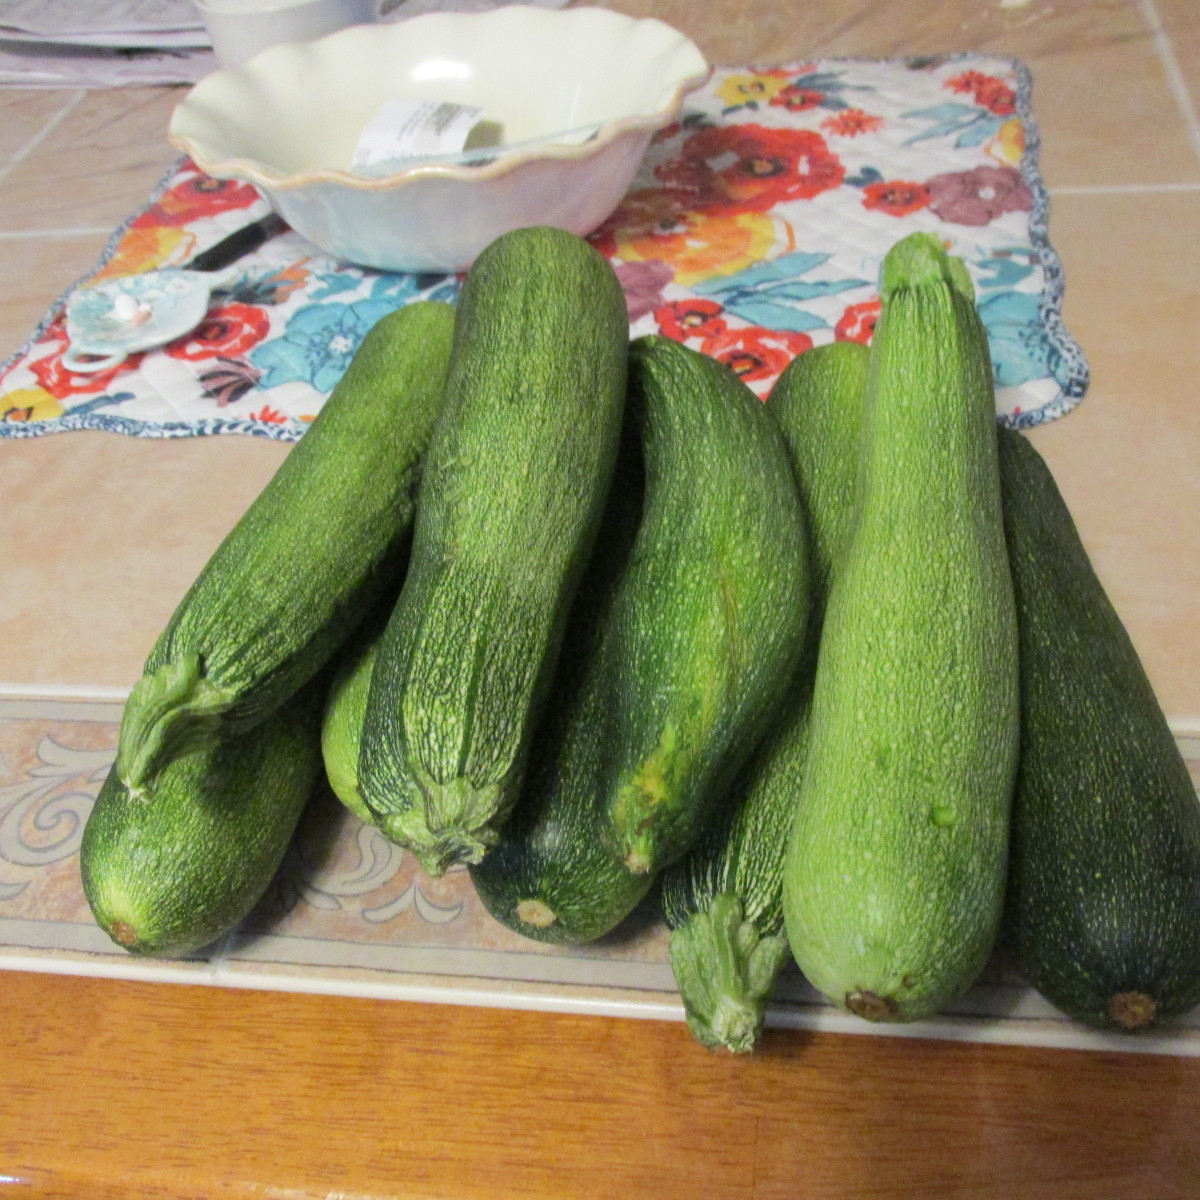 This is just a small fraction of our zucchini harvest this year!